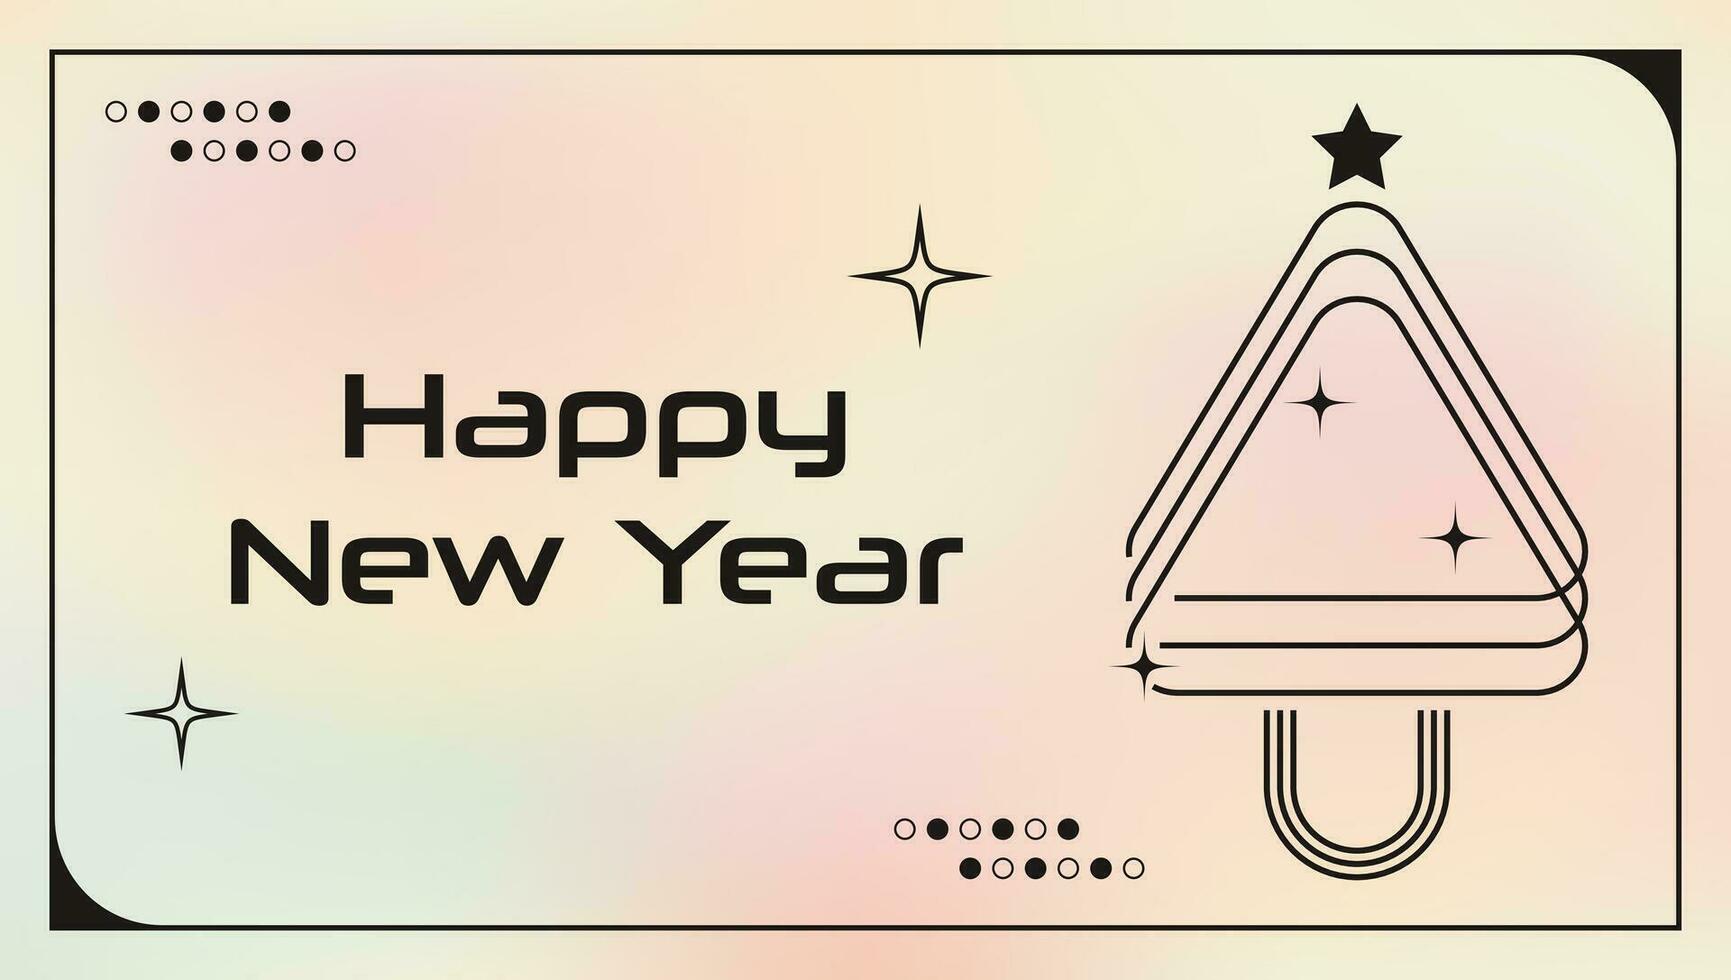 Y2k Happy New Year retro Banner in abstract aesthetic style. Vector illustration with 2000s pastel gradients. Design template with jolly star, shapes, tree with editable stroke.